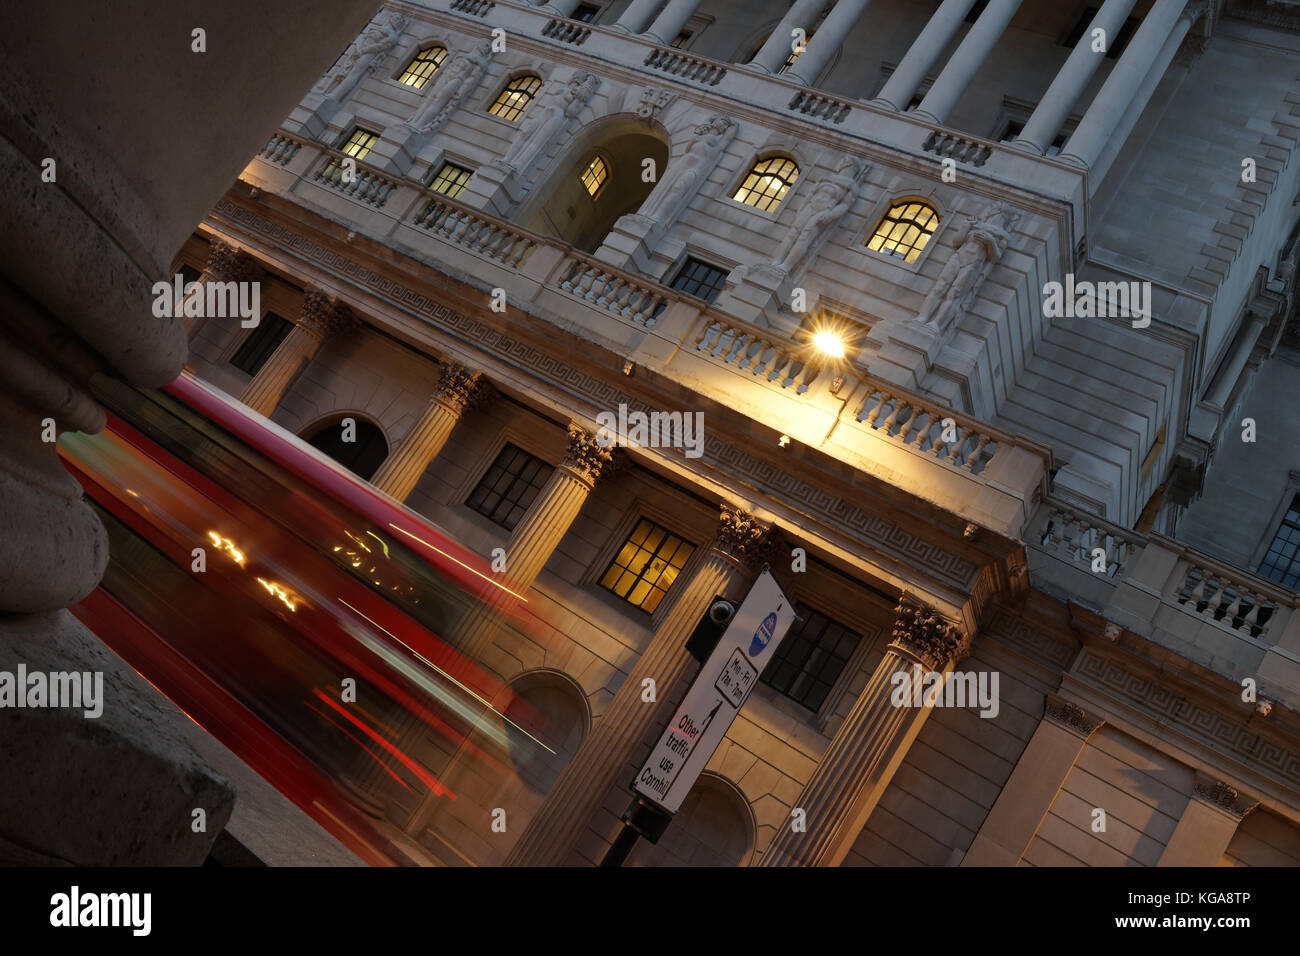 The Bank of England, London, at night Stock Photo